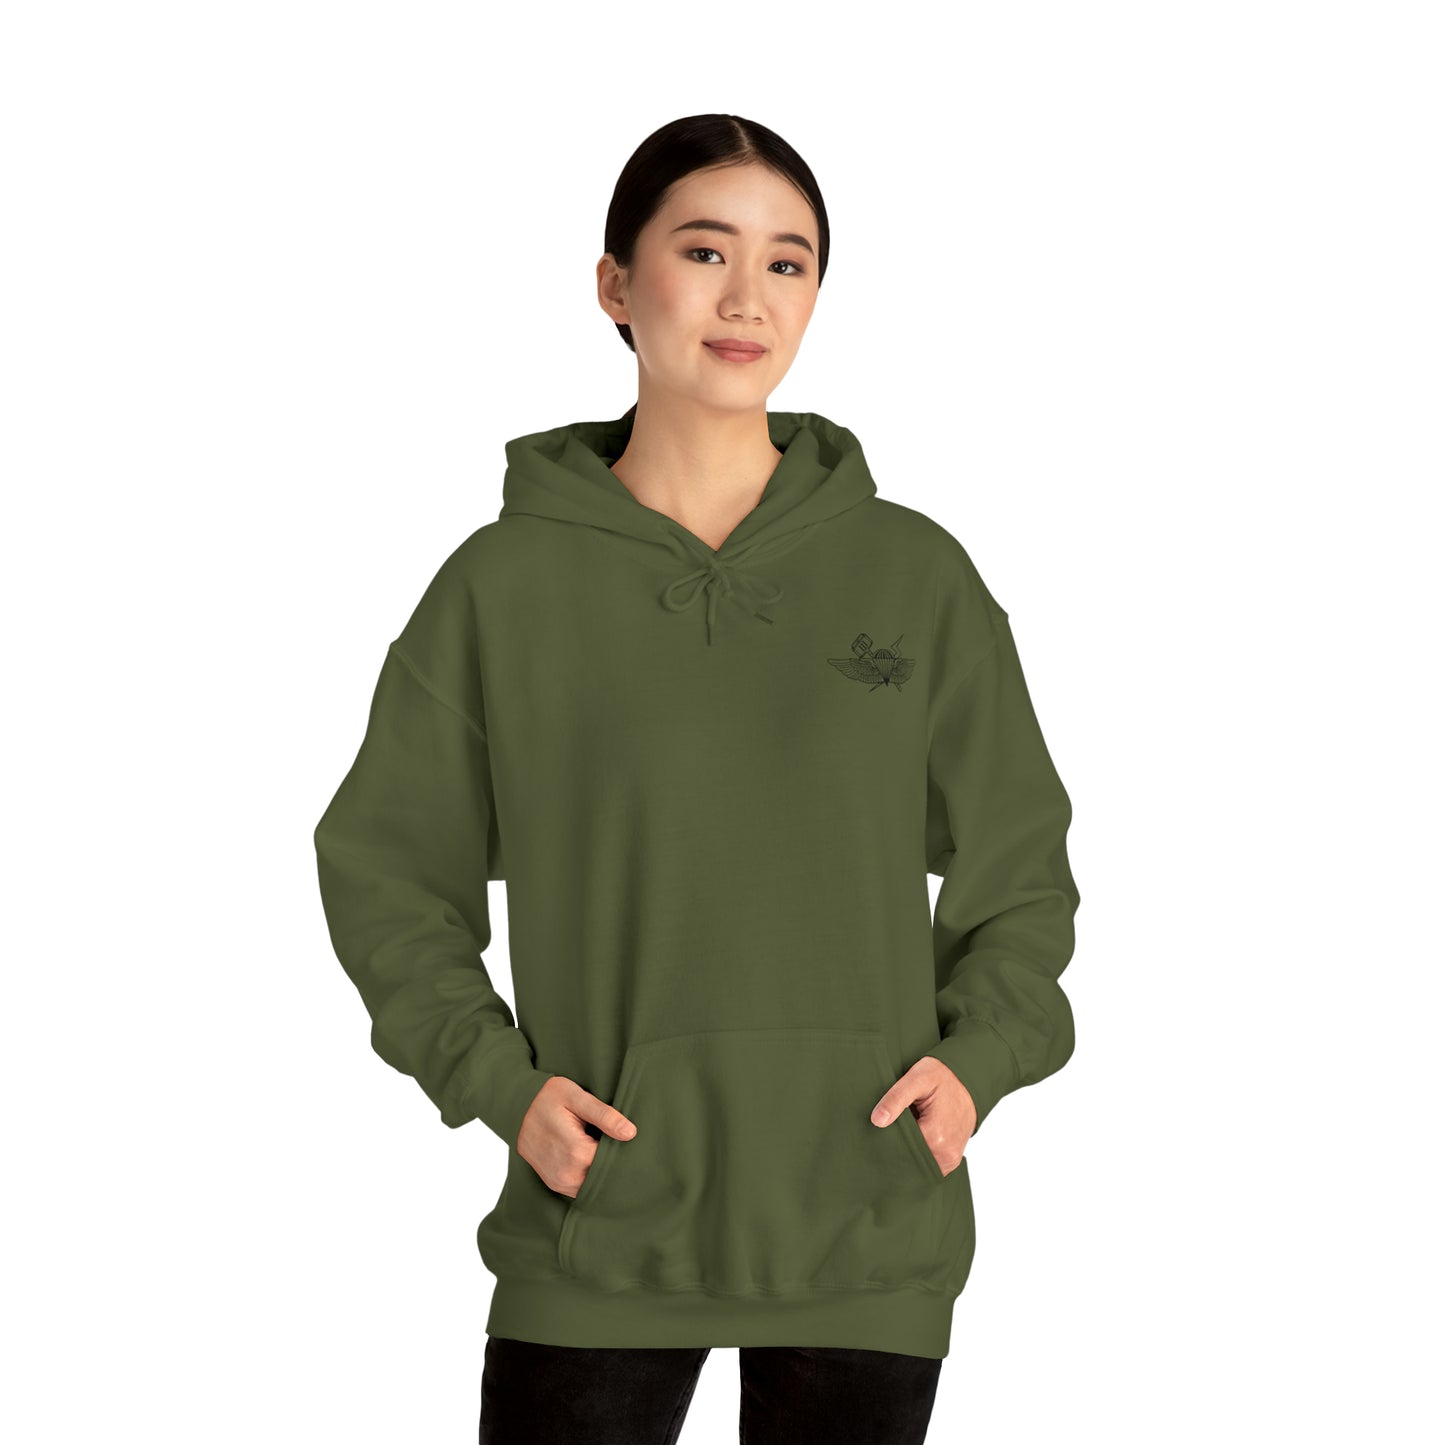 3rd ANGLICO Motor-T Hoodie